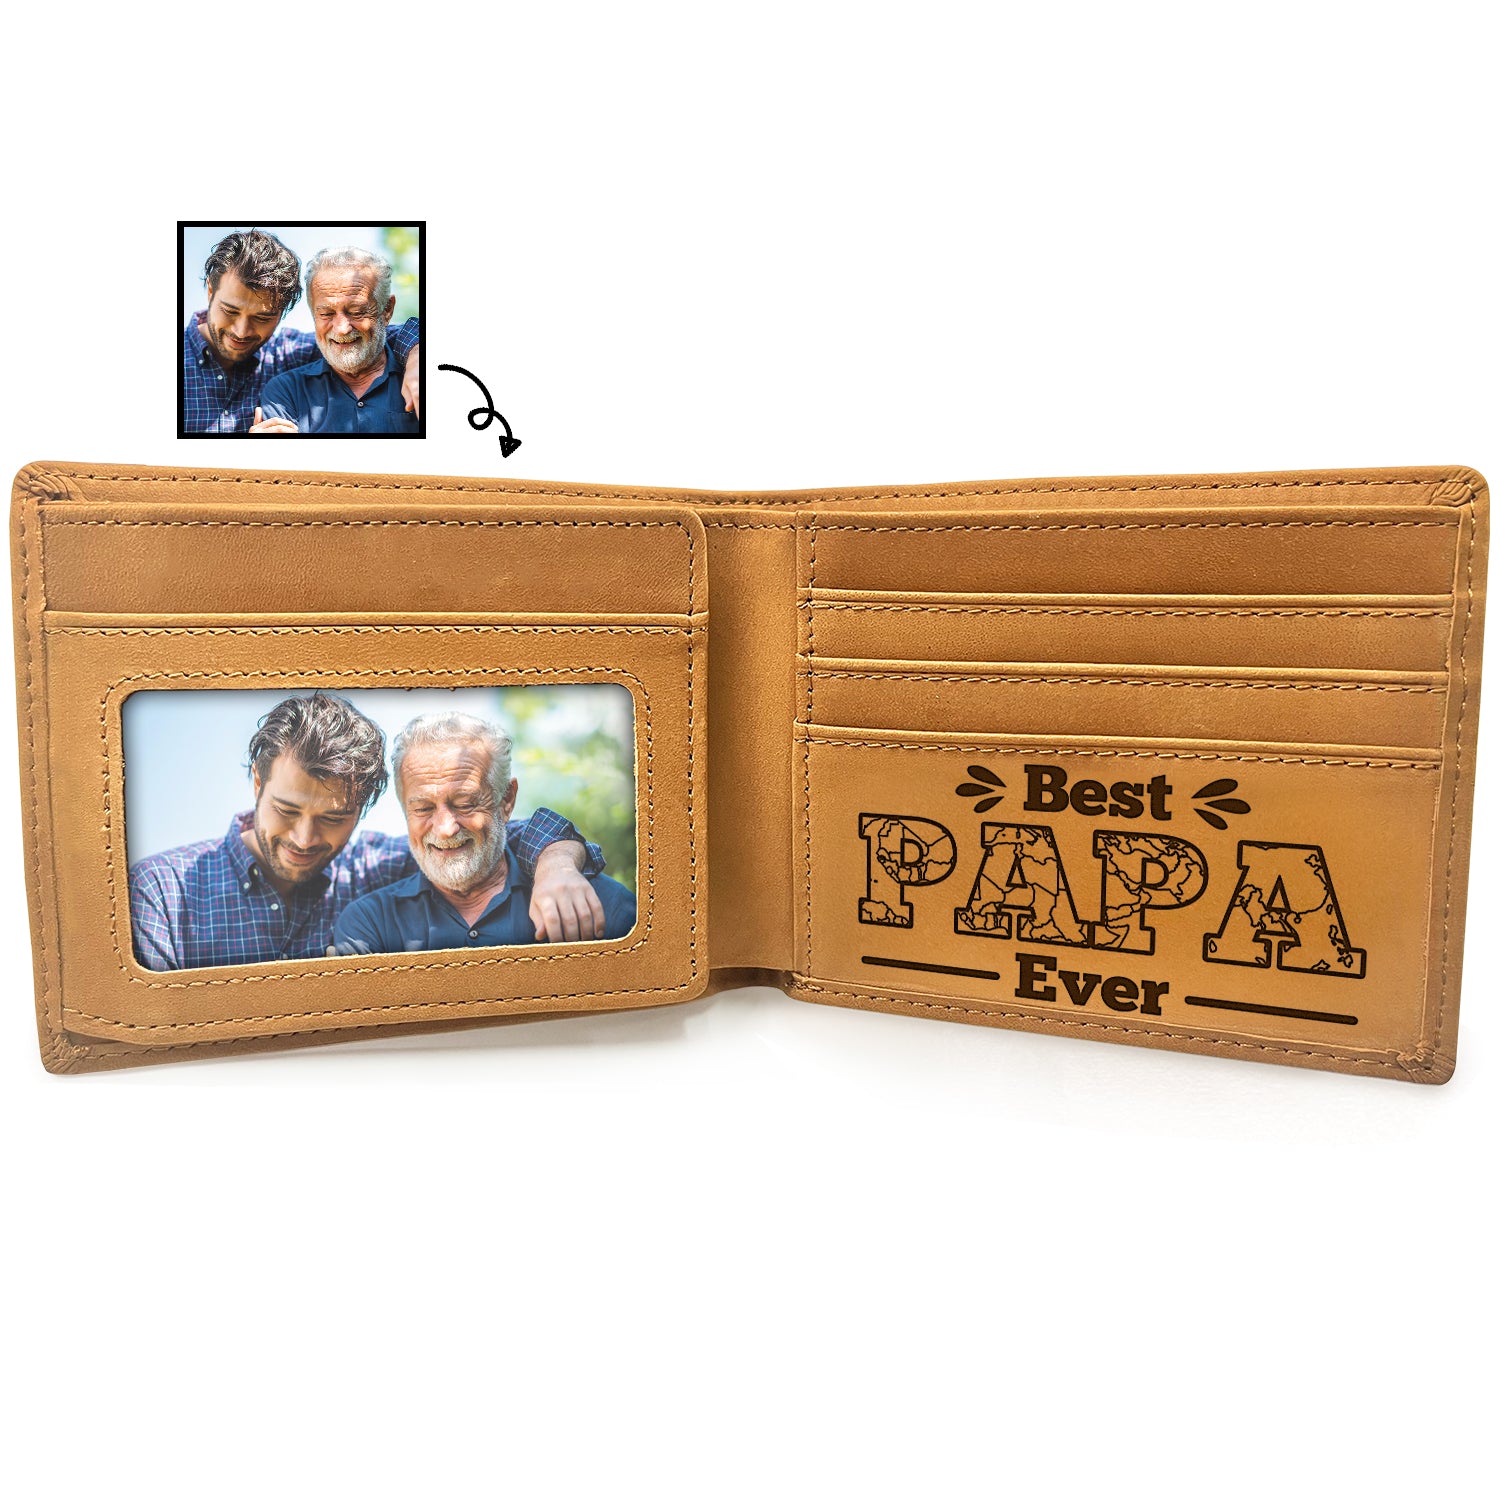 Custom Photo Map Best Papa Ever - Holiday, Birthday Gift For Dad, Father, Grandpa - Personalized Bifold Wallet